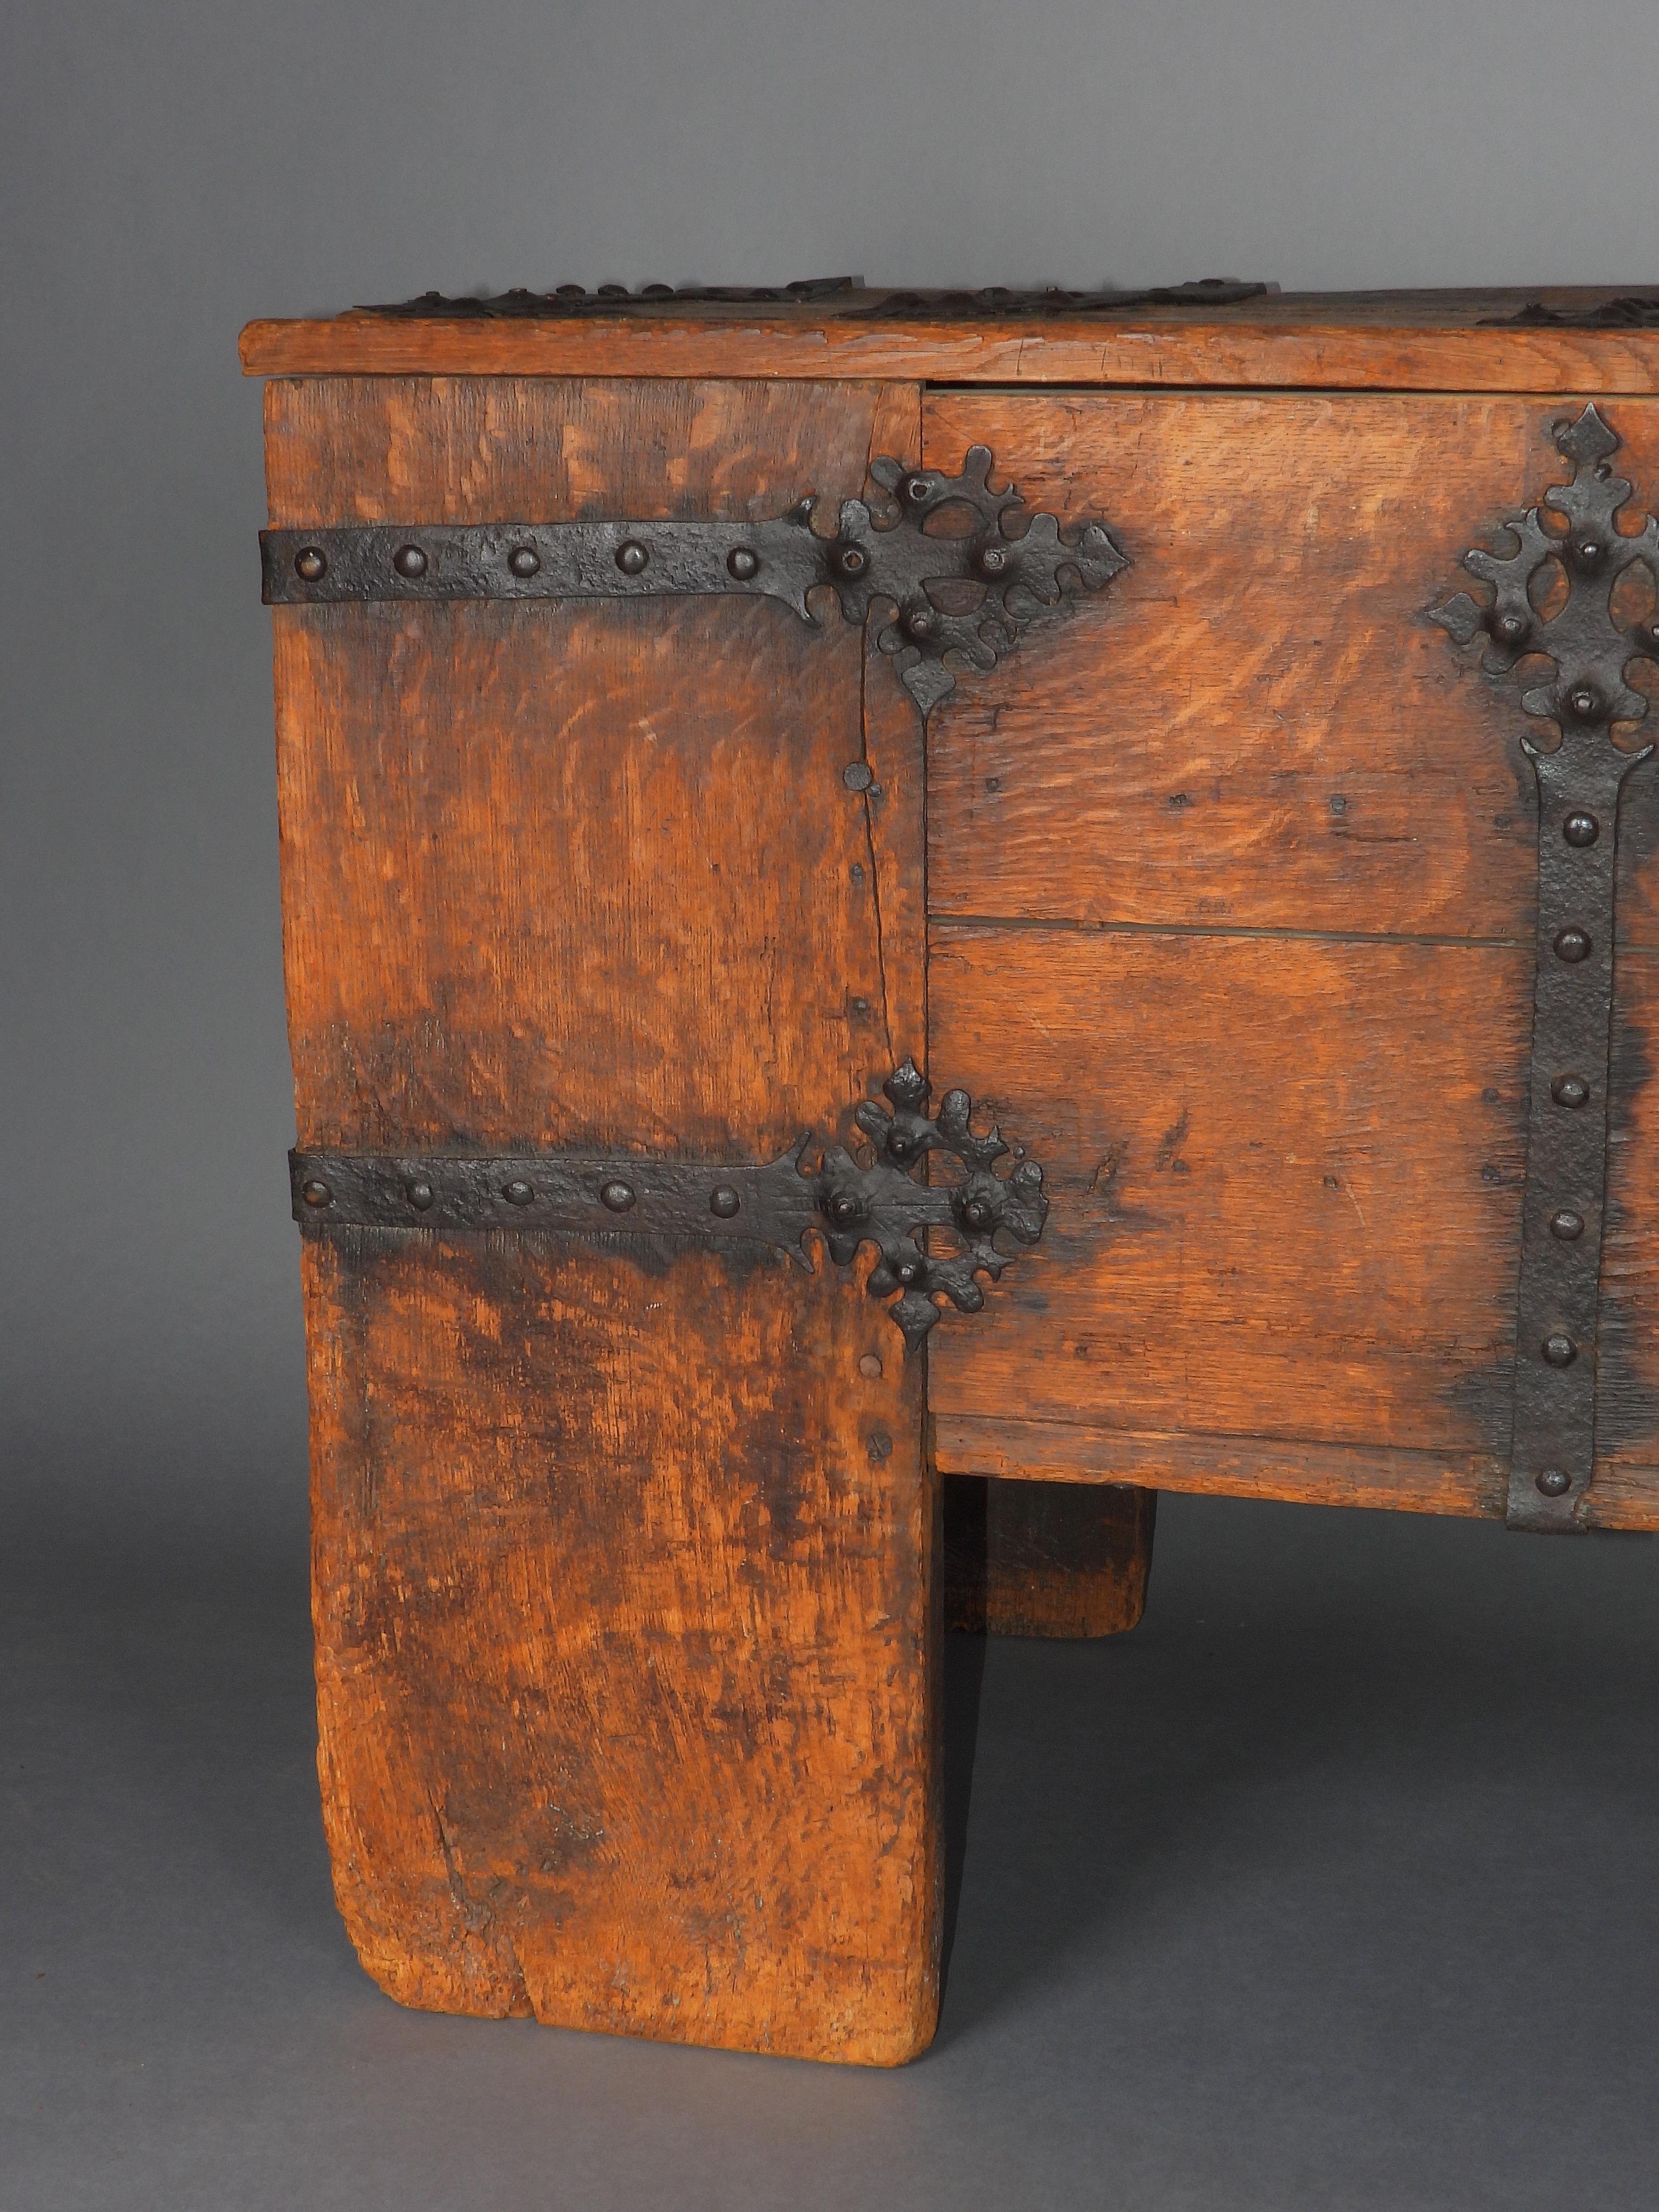 Rare Late Medieval 16th Century German Wrought Iron Oak Chest For Sale 13